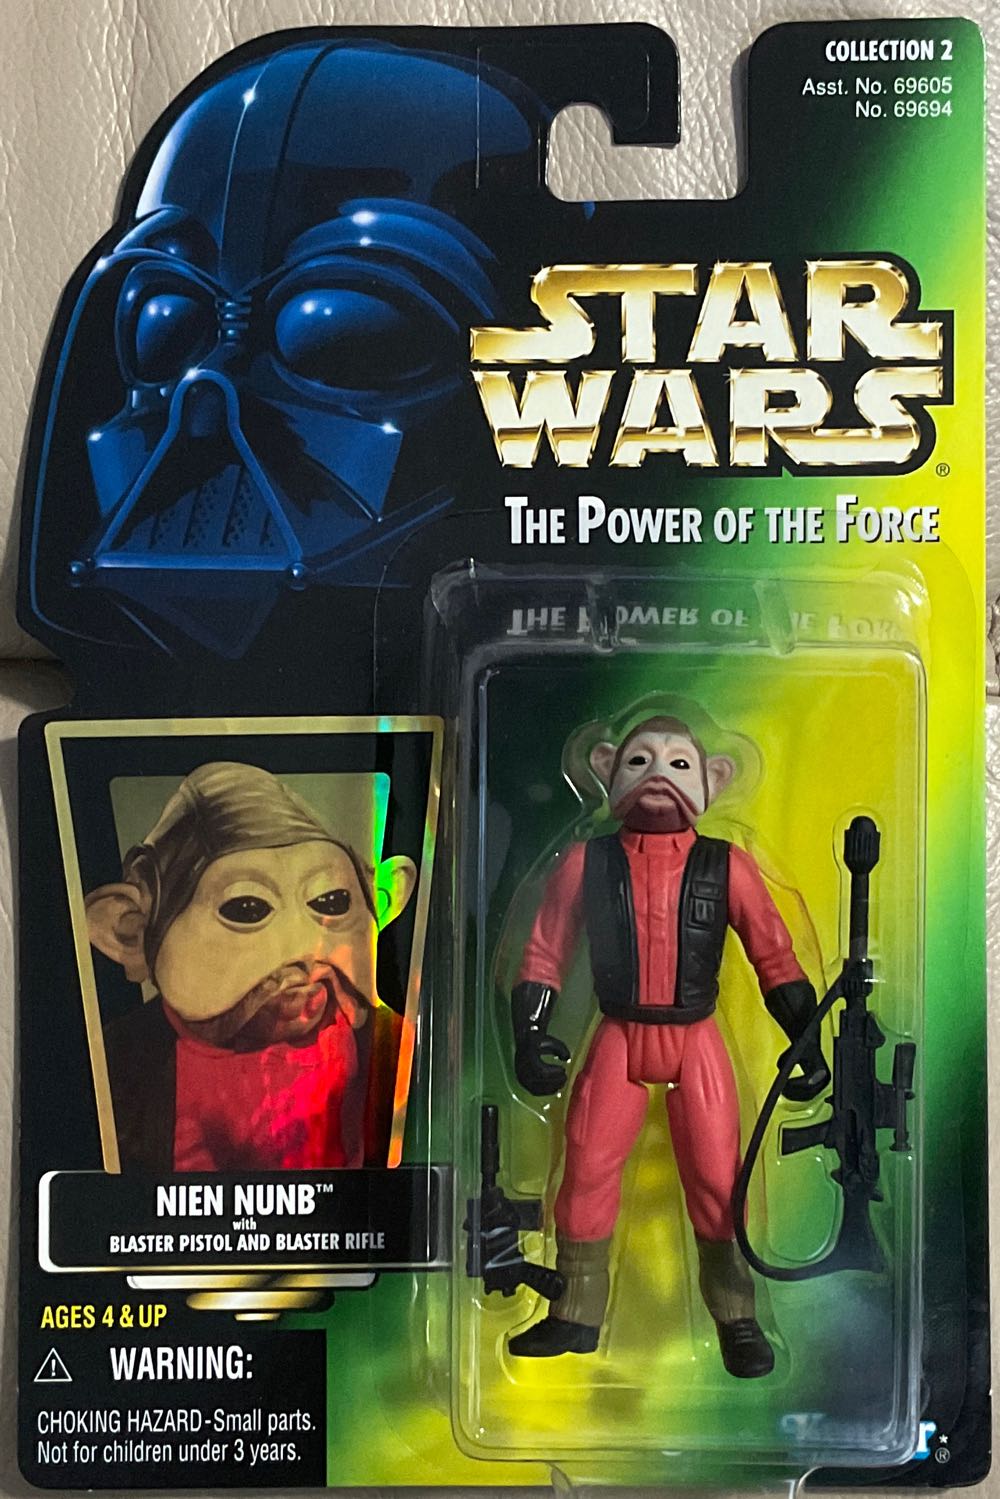 Power Of The Force (GC) - Nien Nunb - Hasbro (Return Of The Jedi) action figure collectible - Main Image 1